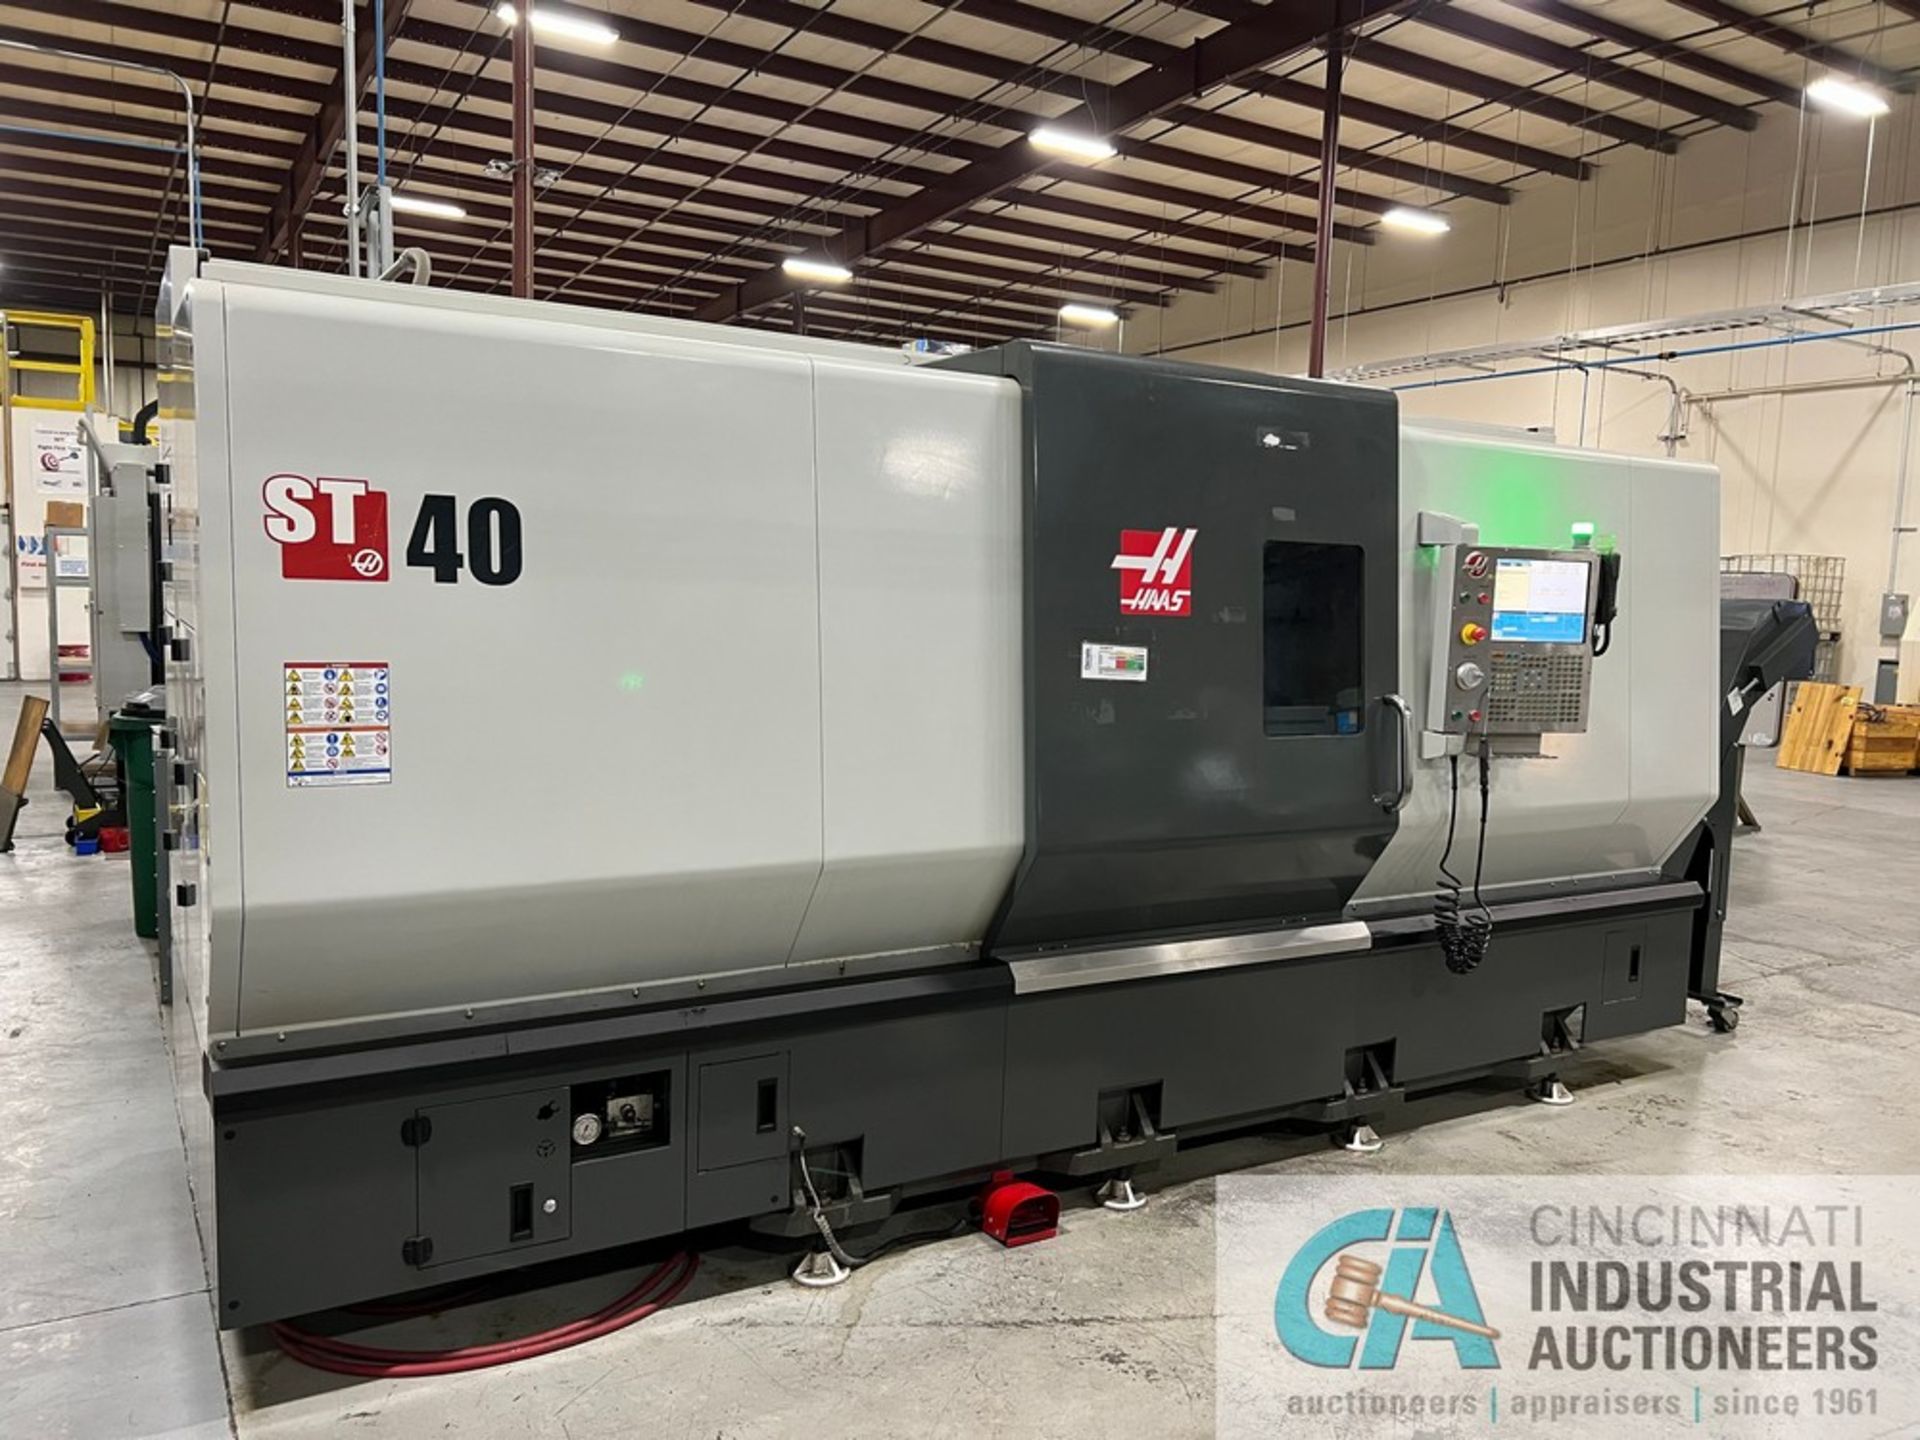 Haas Model ST-40 CNC Turning Center (2014) 1,788 Cutting Hours Showing - Image 3 of 12